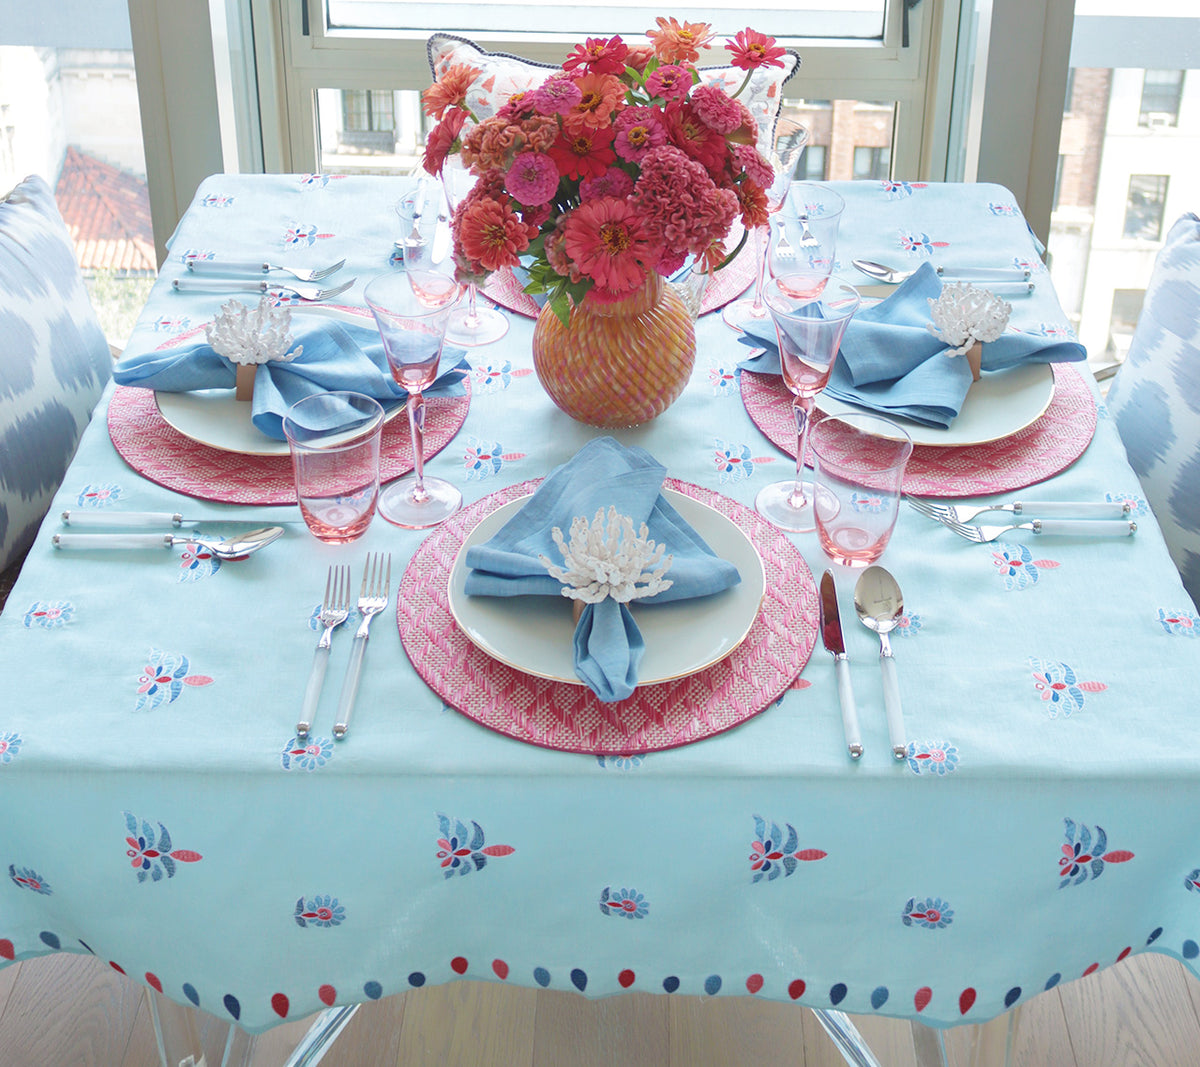 Lima Tablecloth in Sky Blue